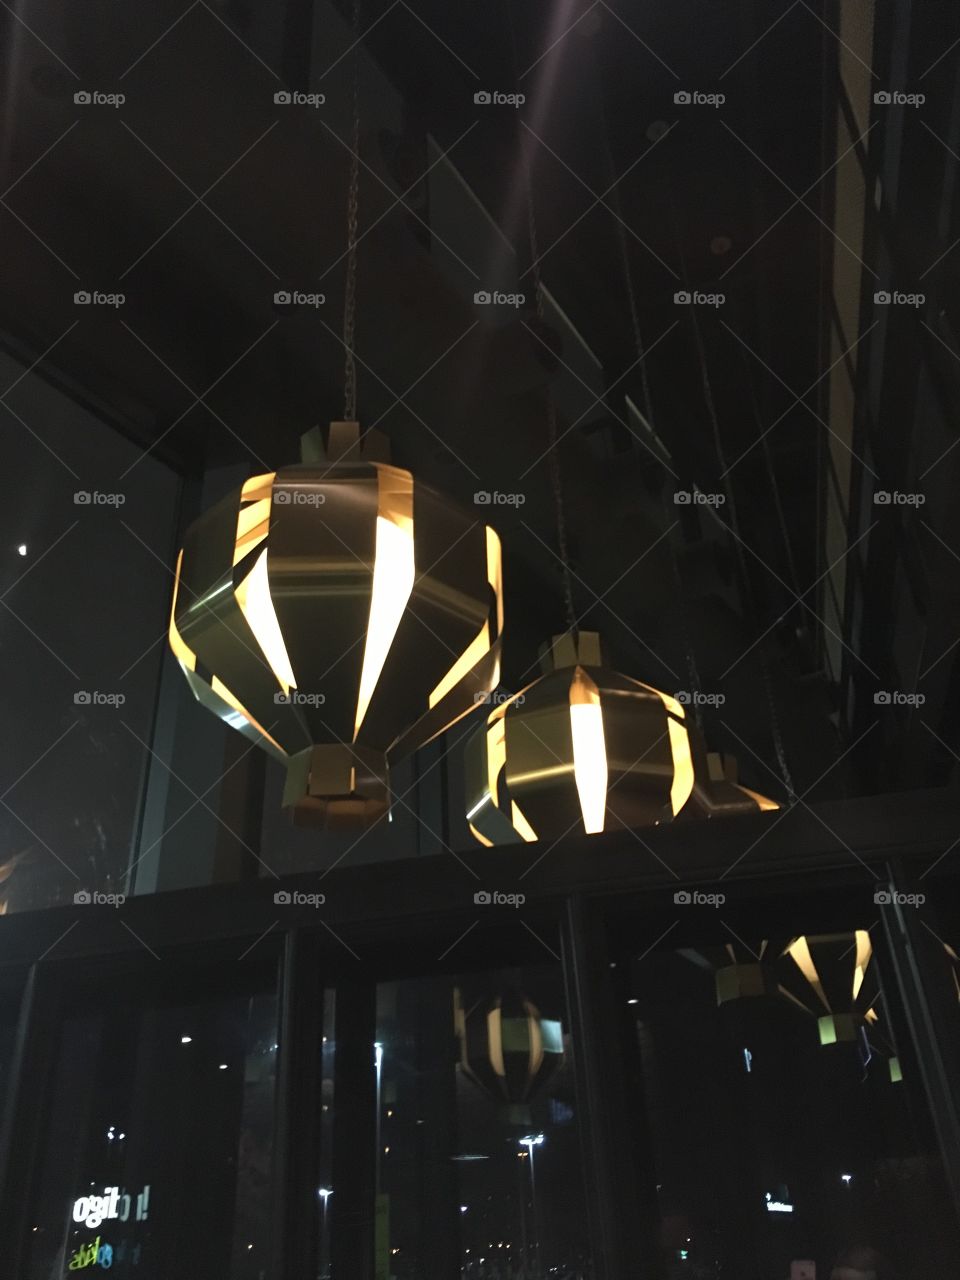 Beautiful inordinate lights hanging in the restaurant known as Joeys.